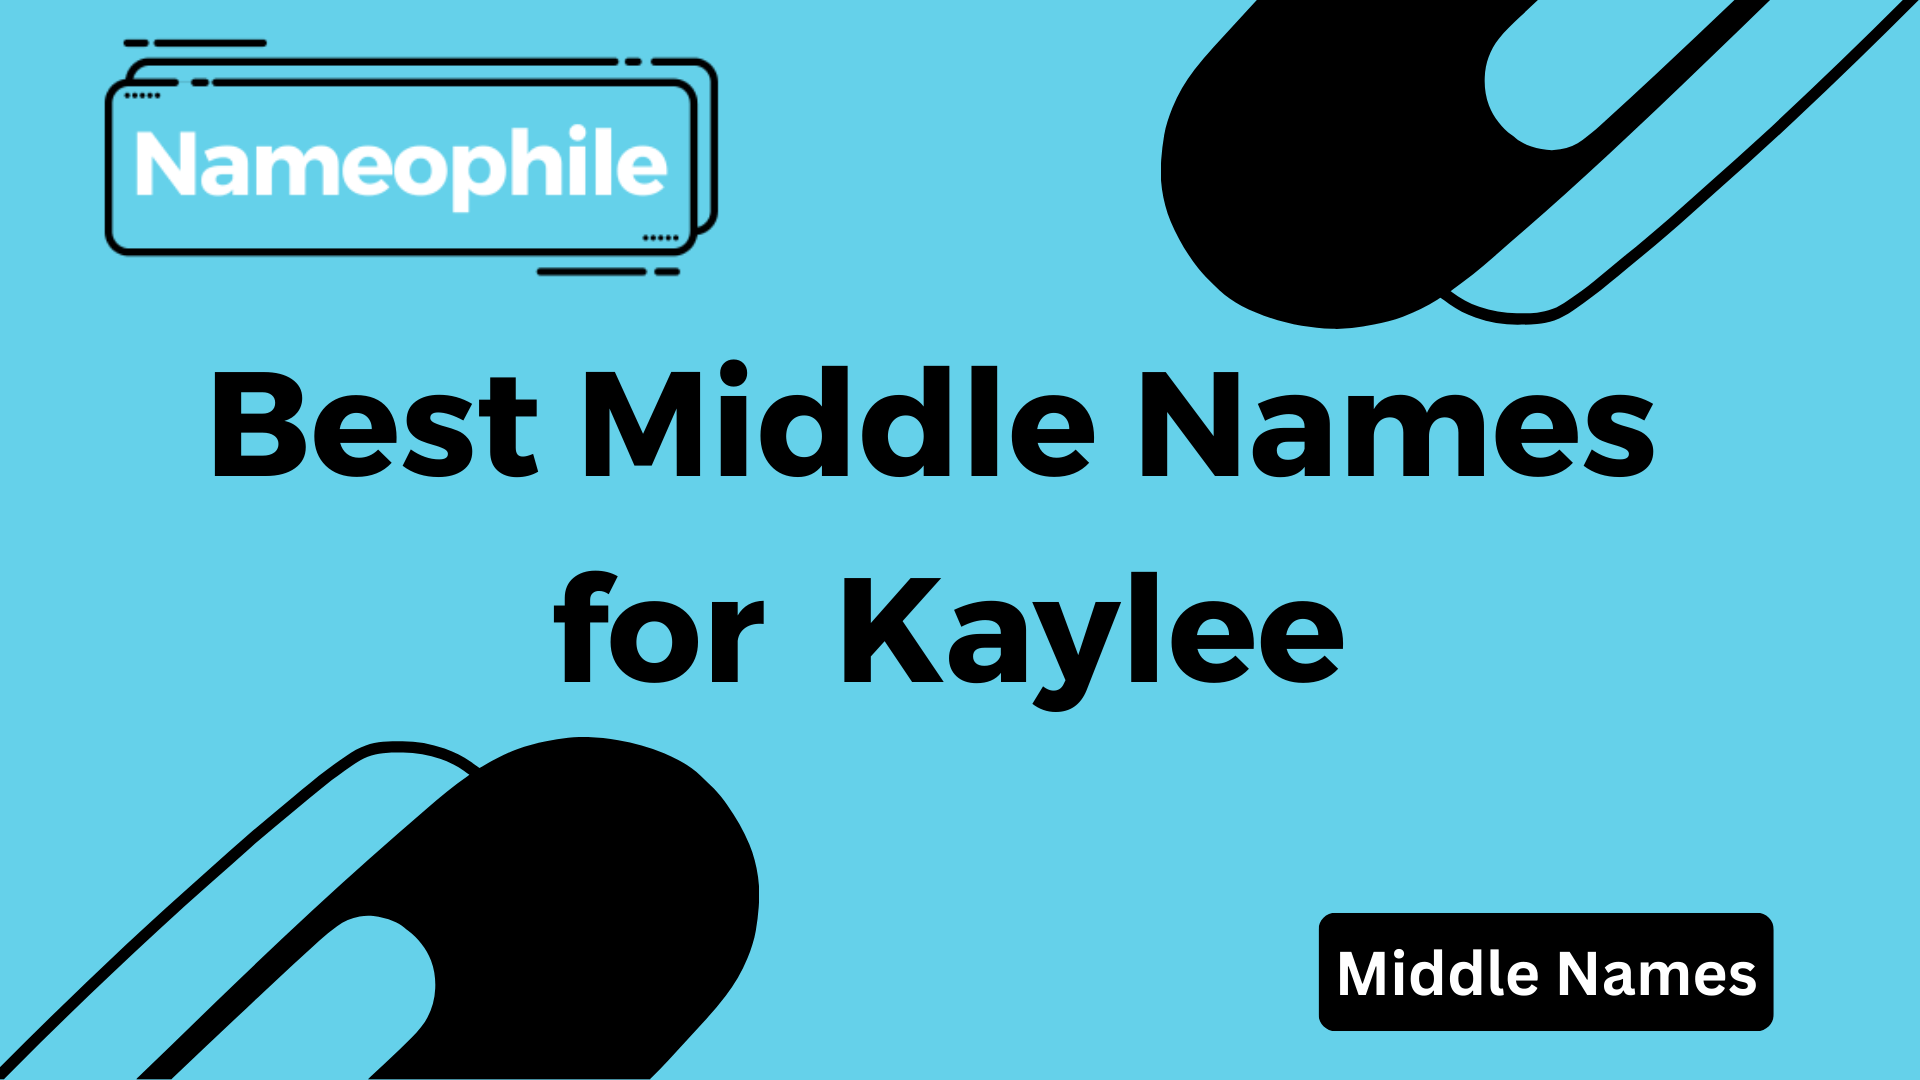 Best Middle Names for Kaylee